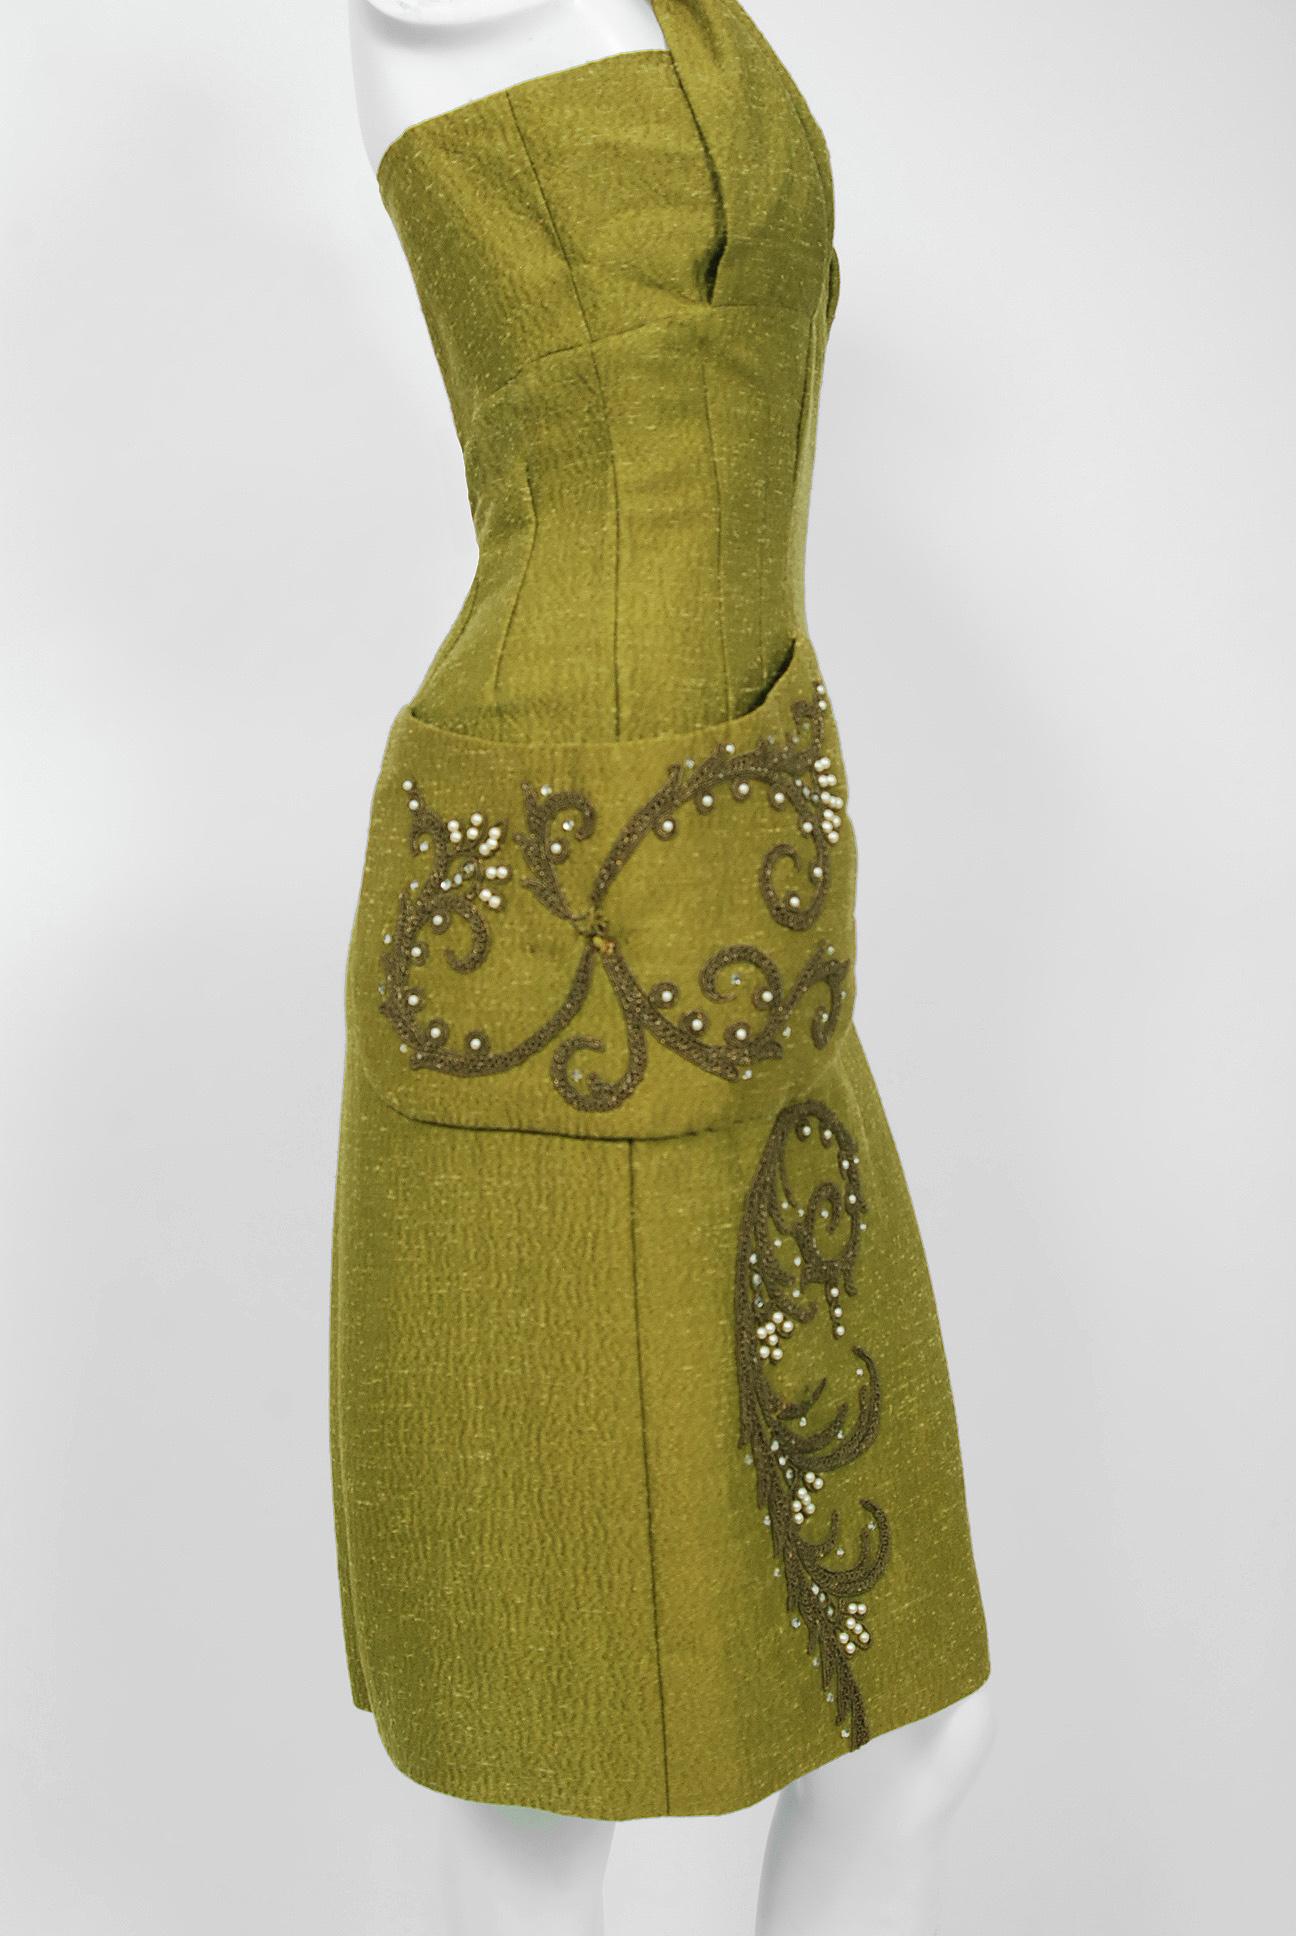 Women's 1954 Lilli-Ann Documented Olive Embroidered Jeweled Silk Halter Cocktail Dress